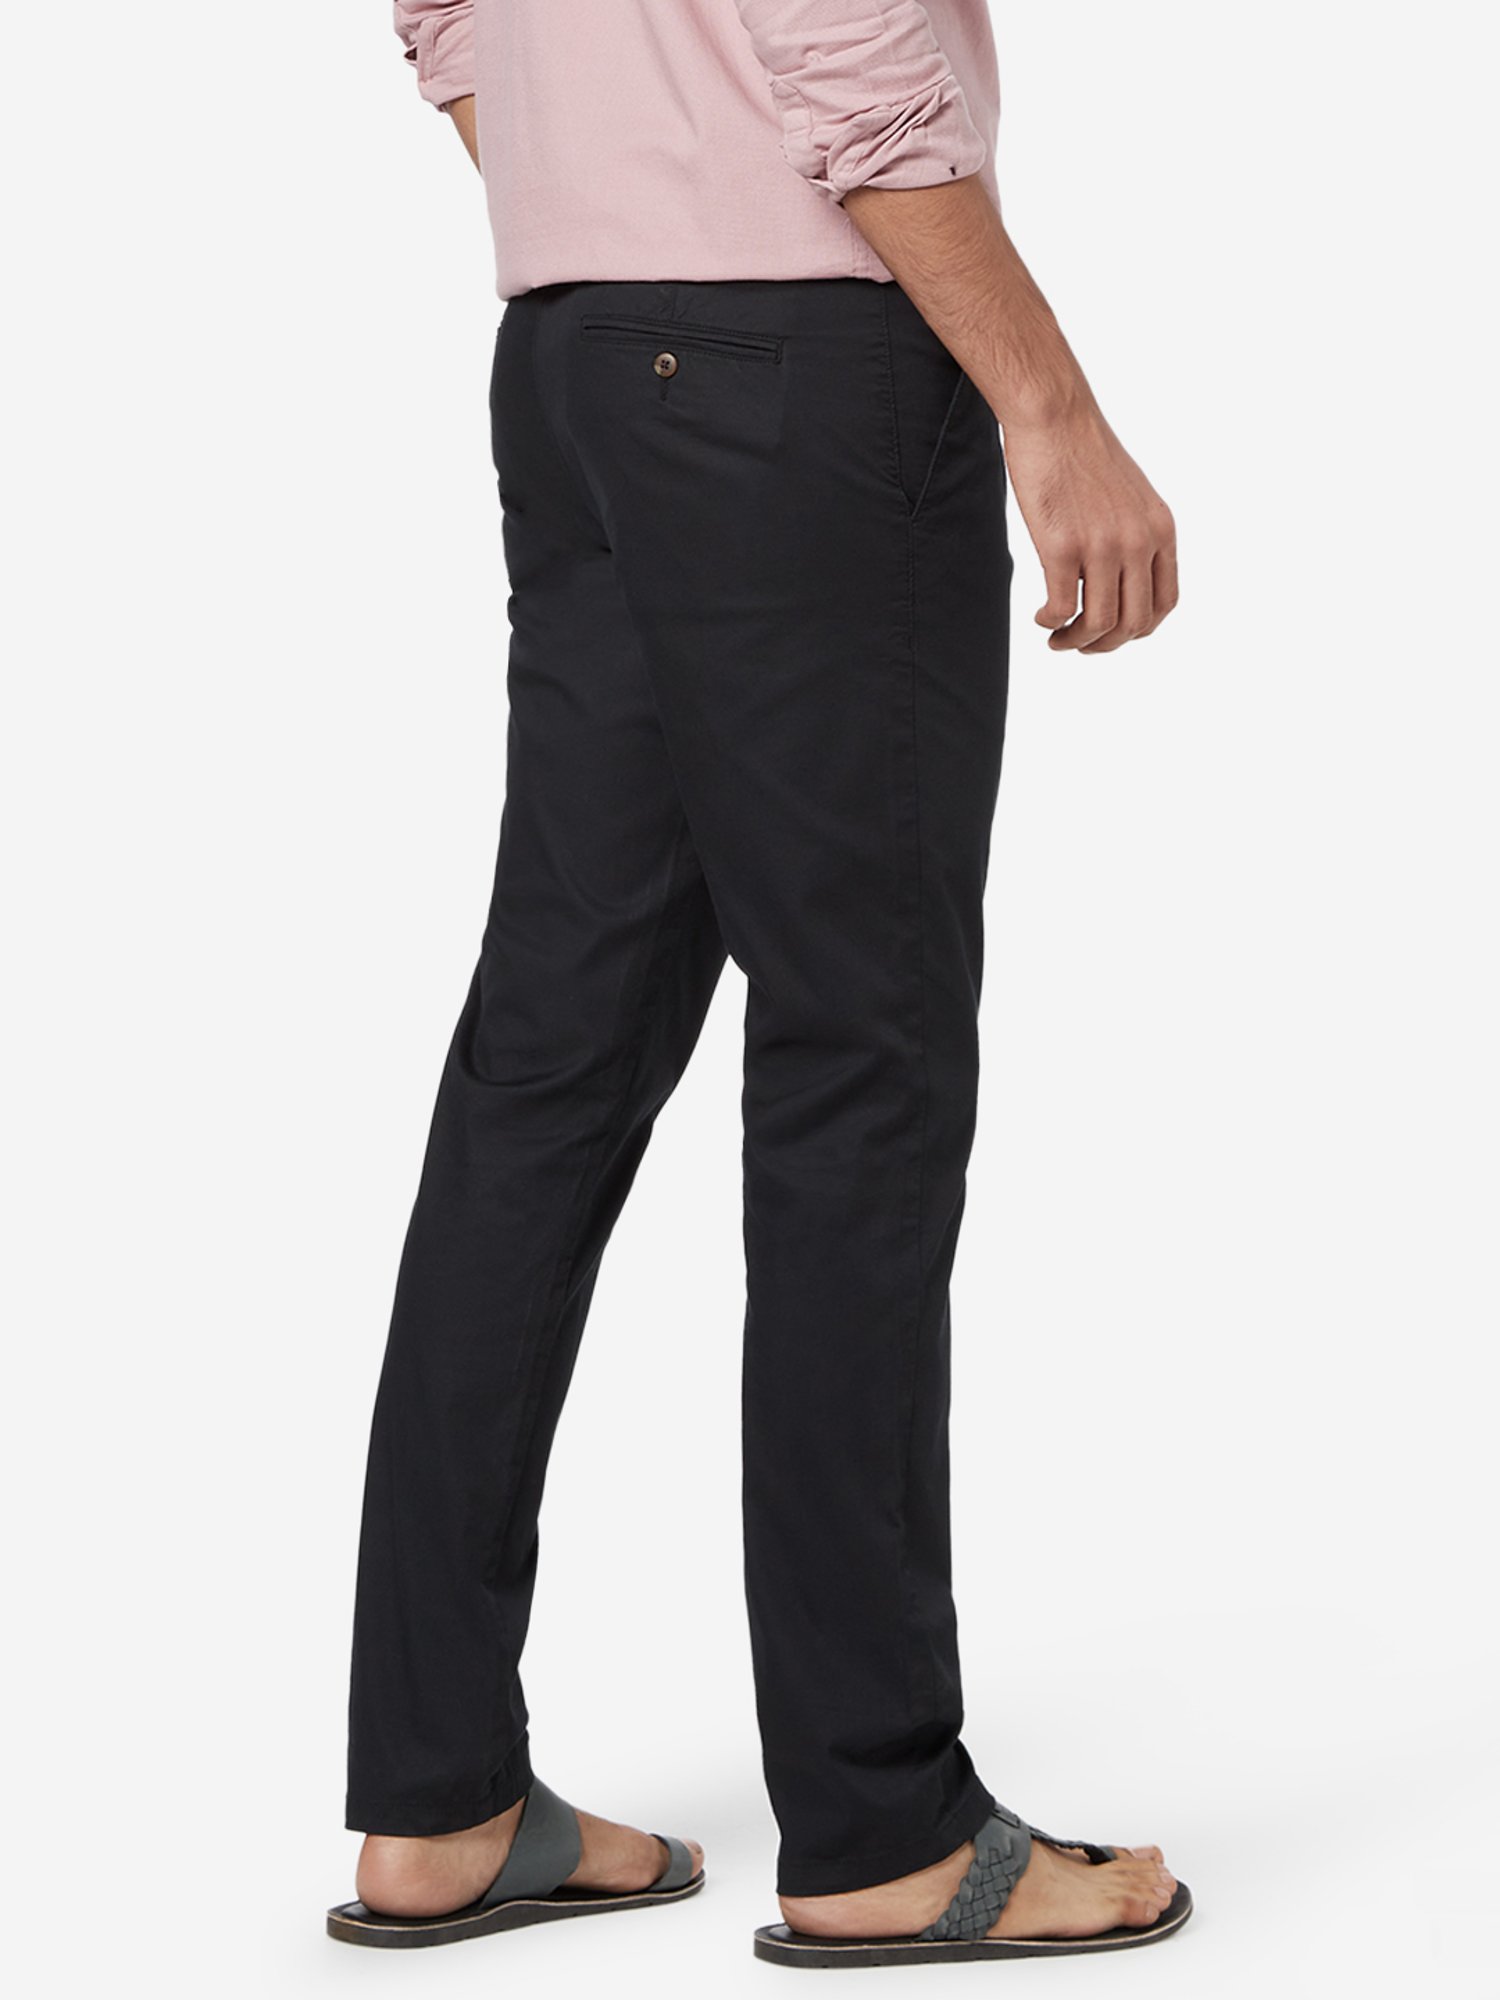 Buy Black Solid Cotton Lycra Chino Pant for Men Online India  tbase